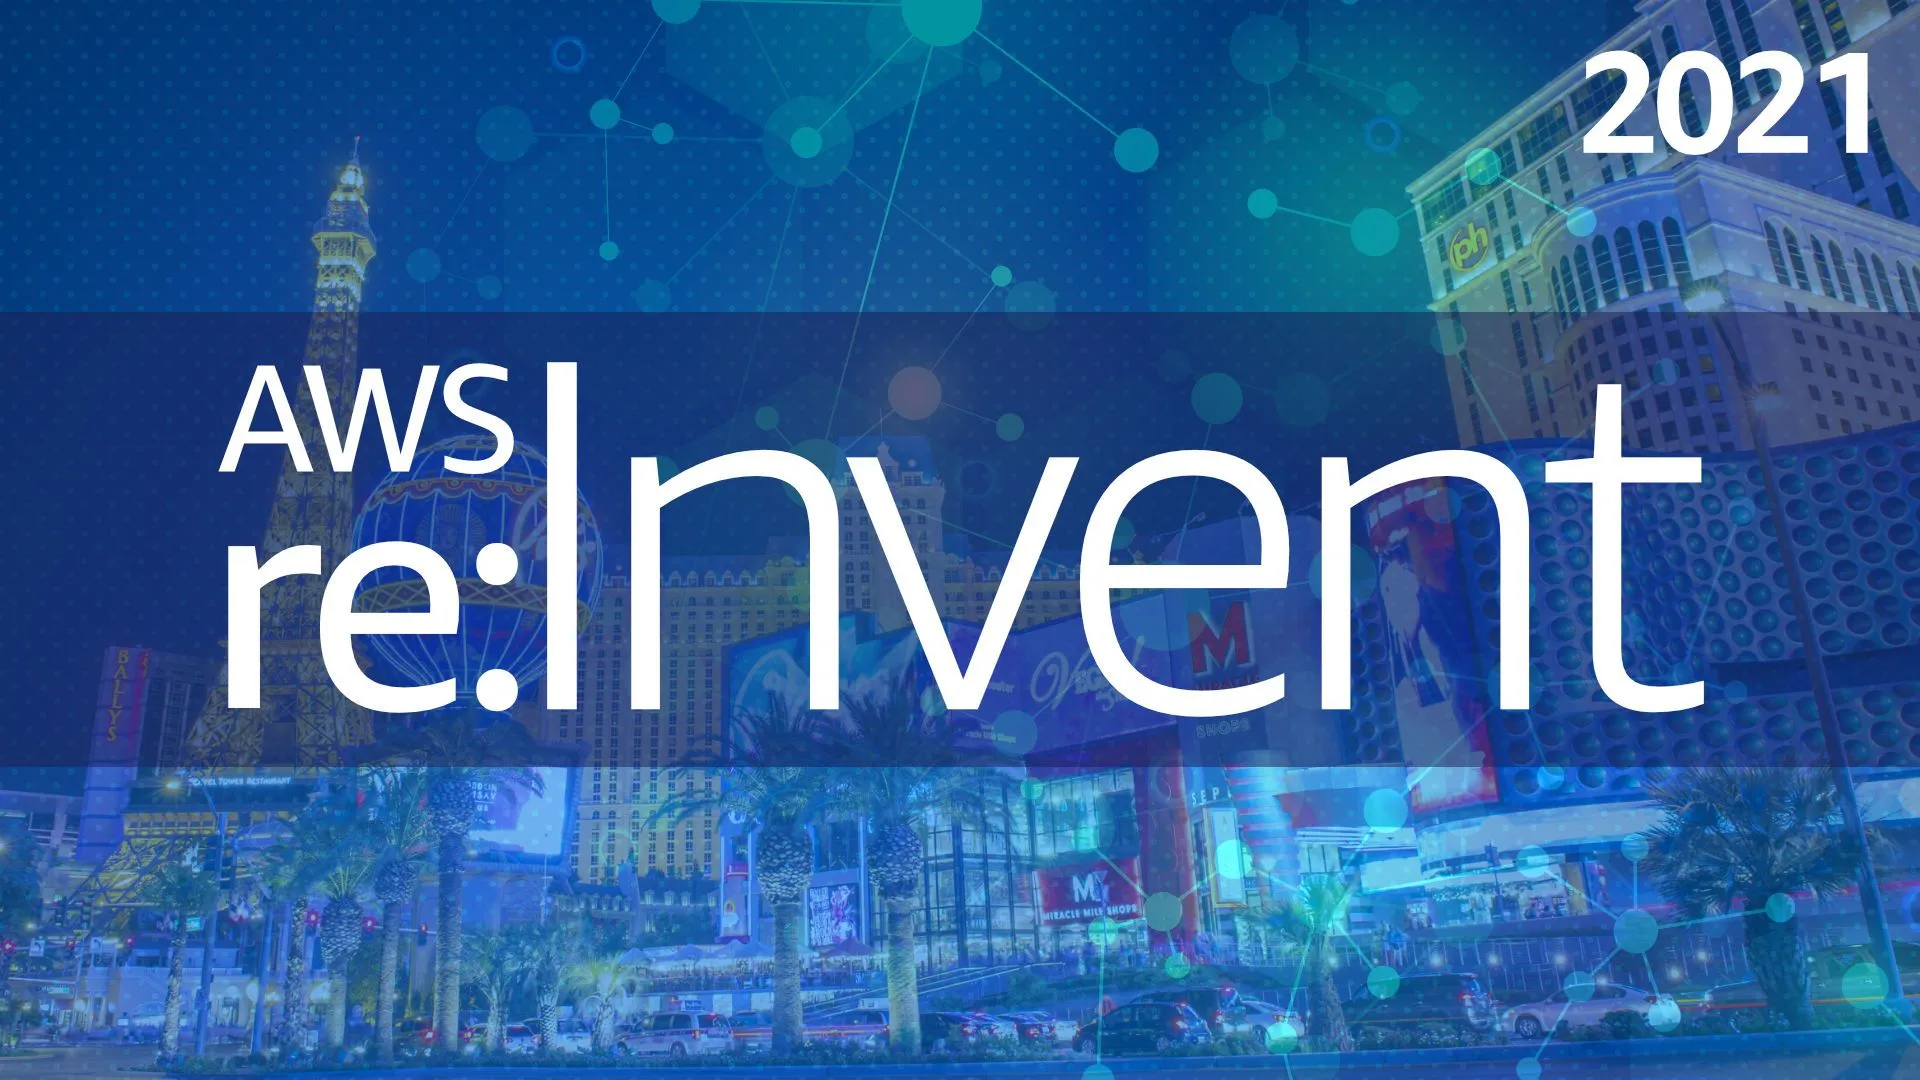 Getting The Most Out of AWS re:Invent Remotely